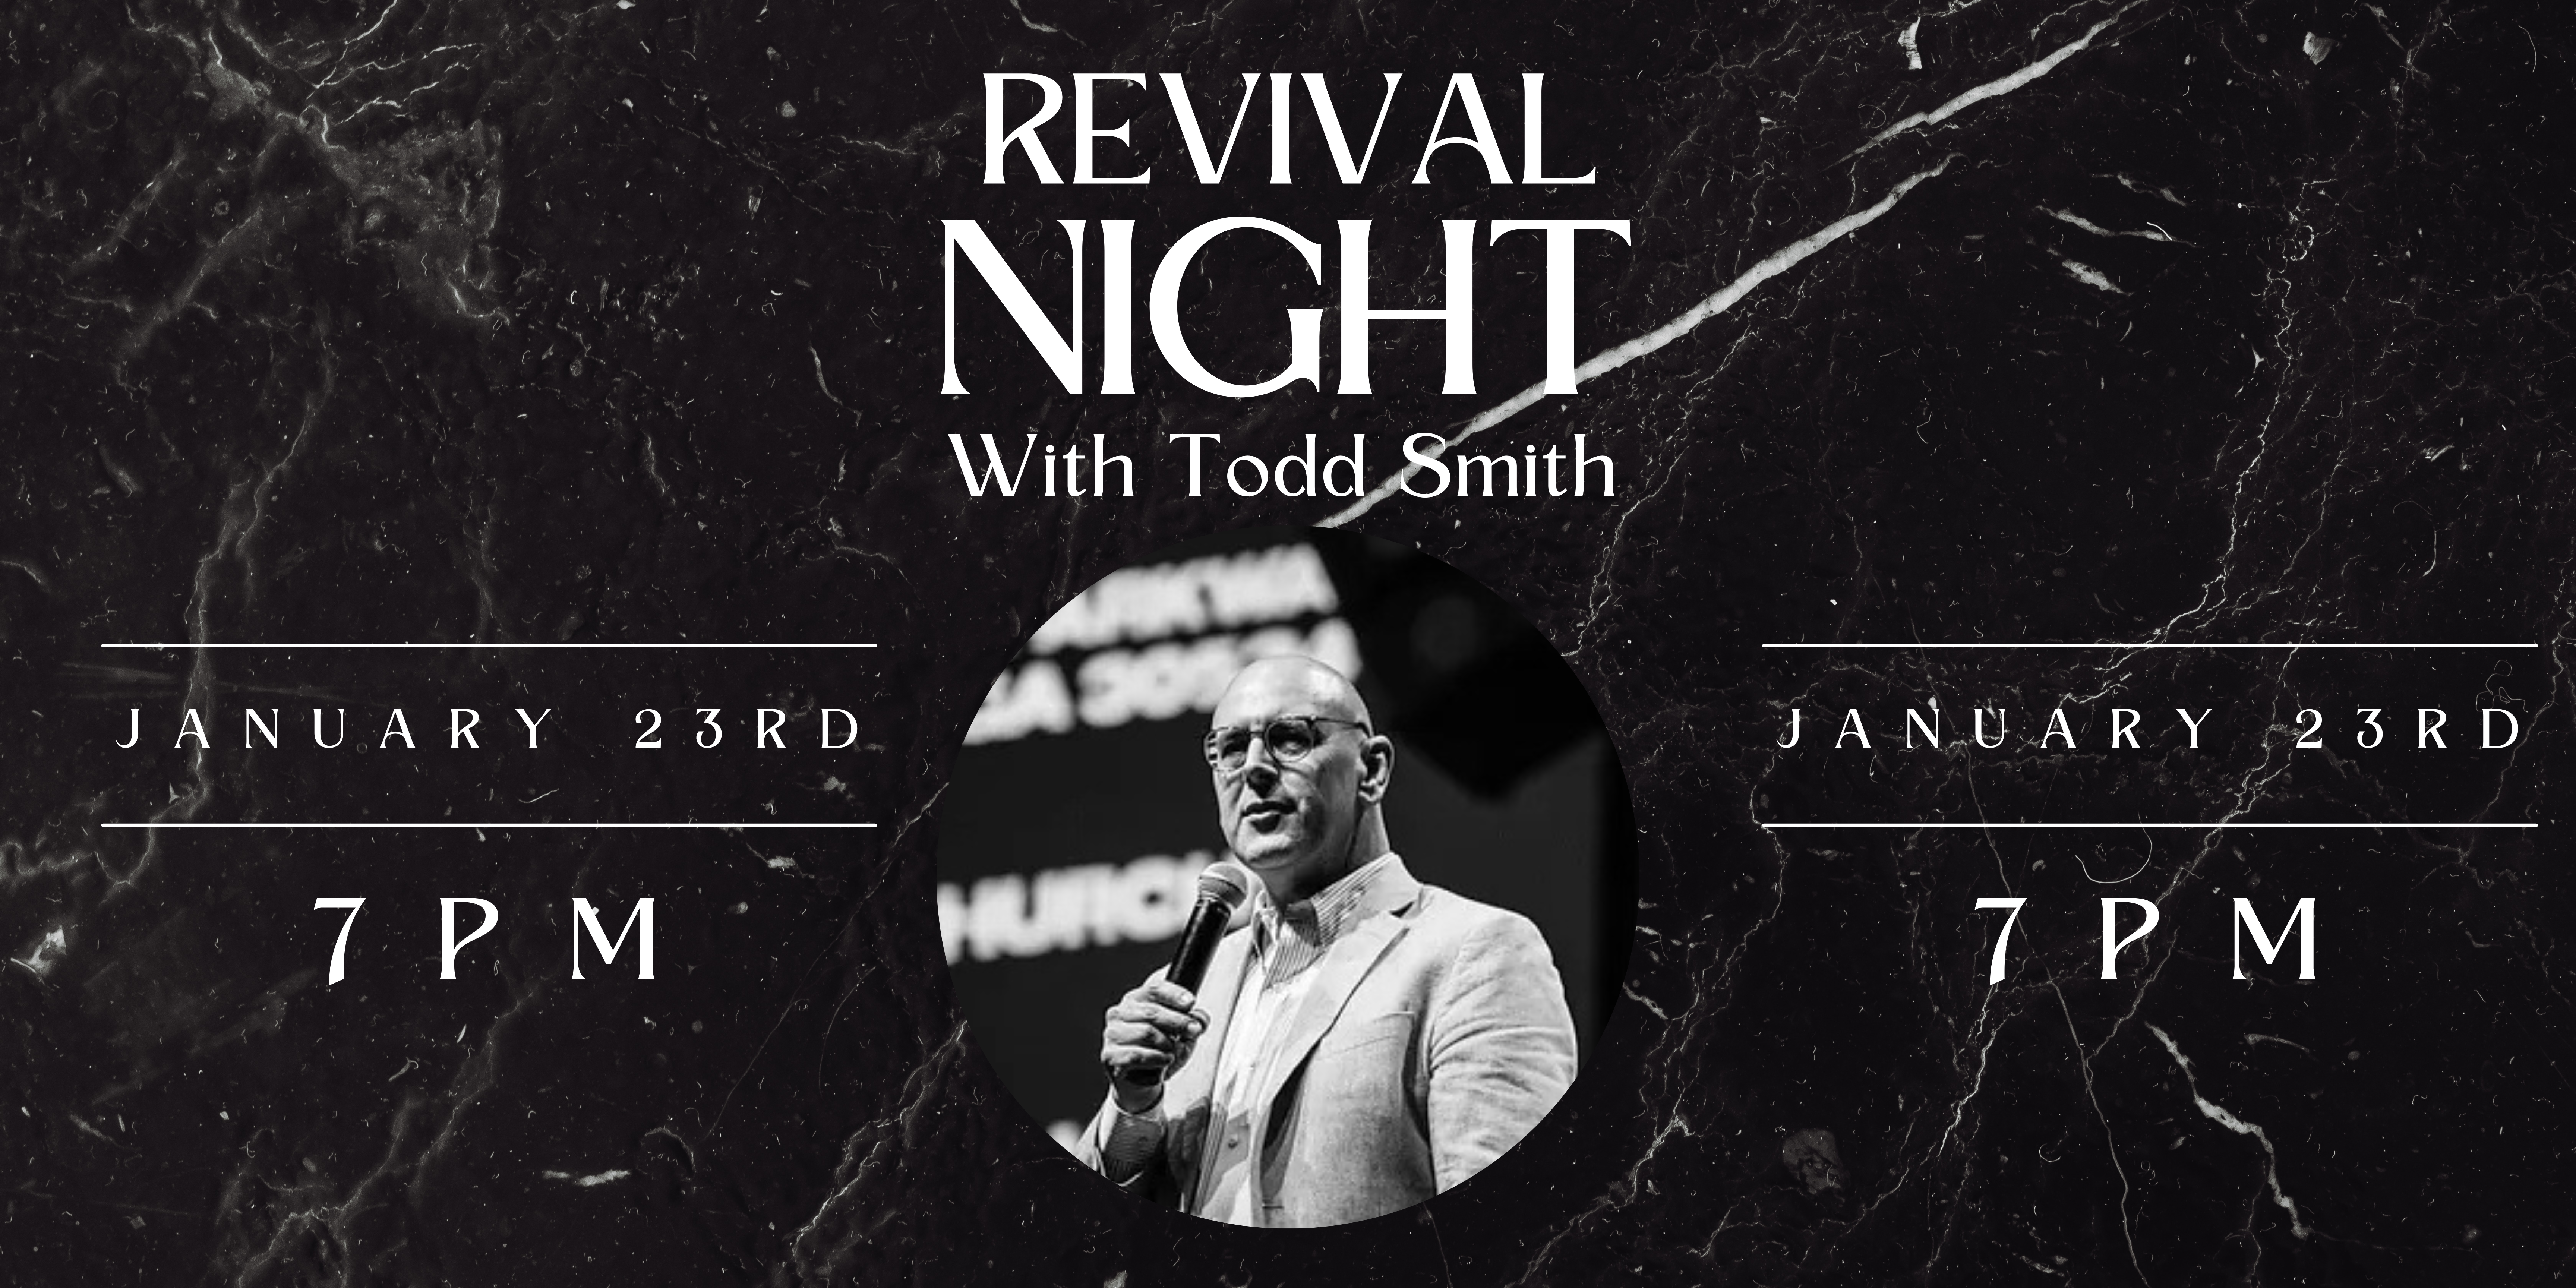 Revival Night with Todd Smith – Jan 23rd!